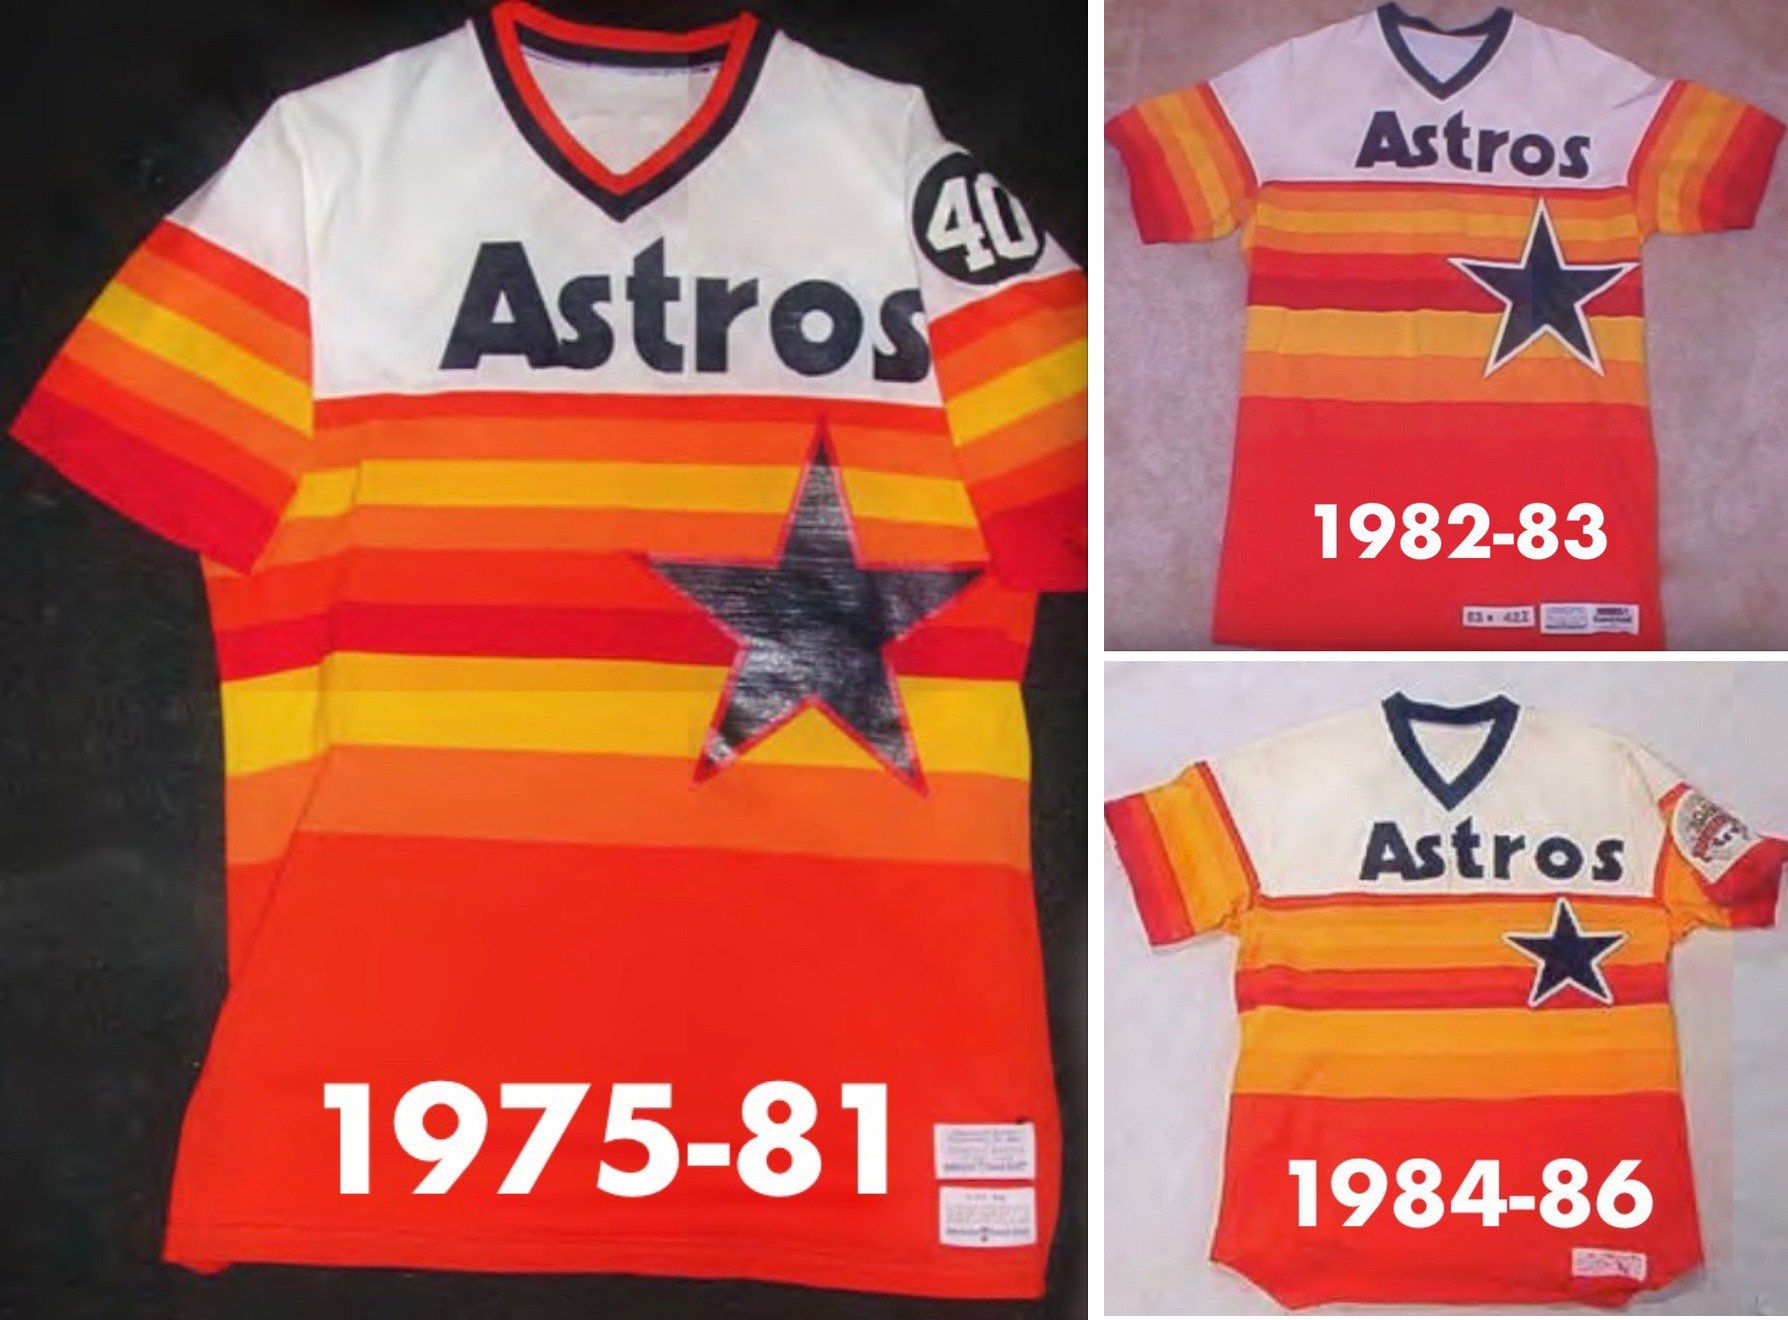 Paul Lukas on X: Star on front of Astros' rainbow jersey evolved